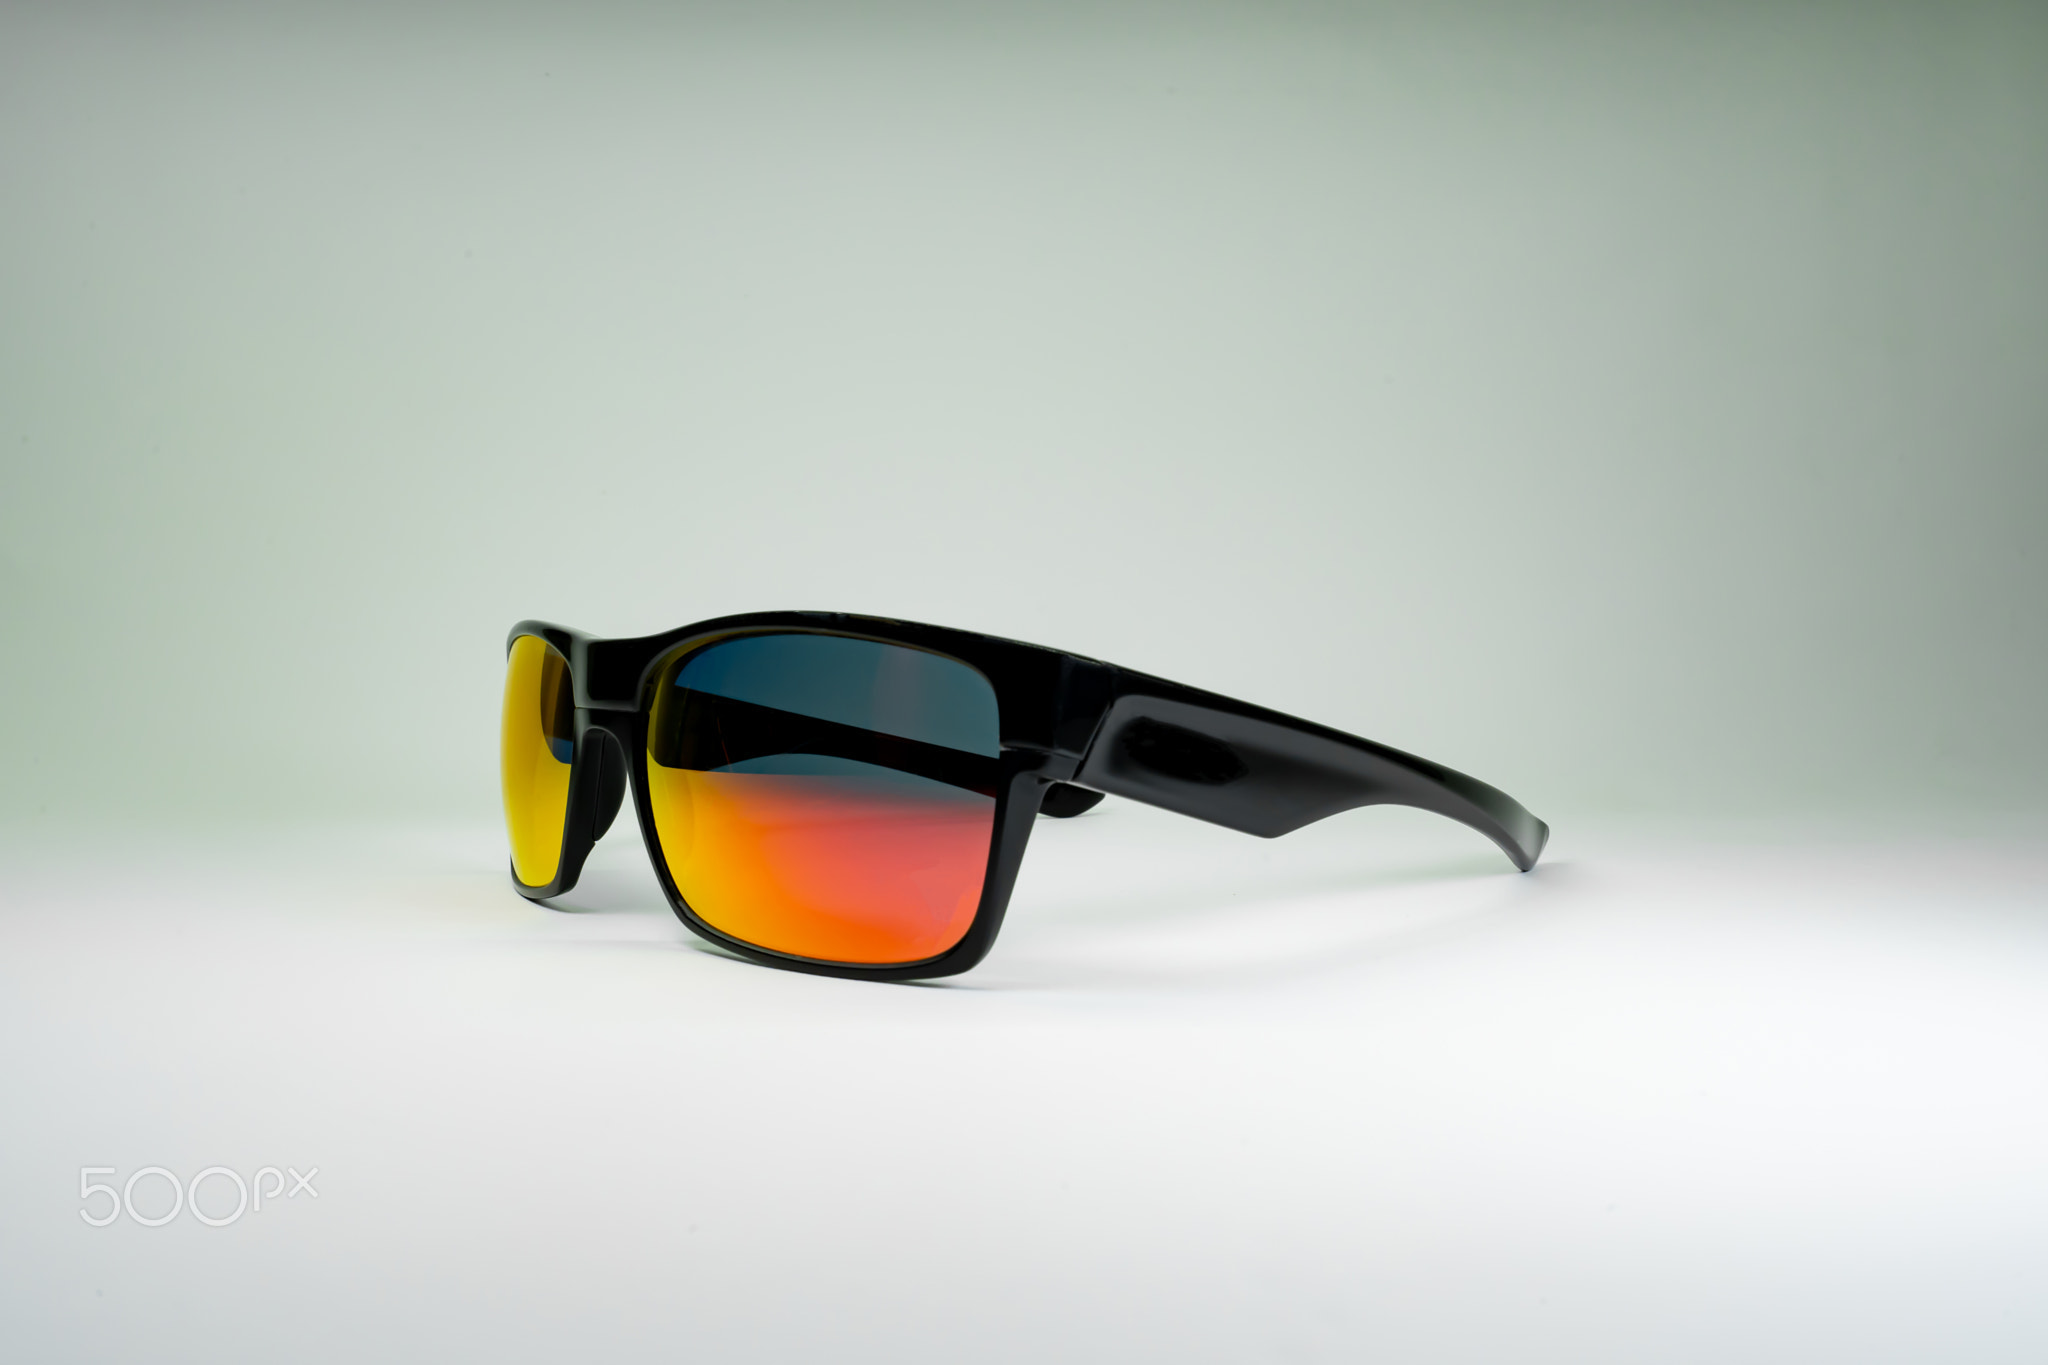 Product photo of sun Glasses with orange glass and black frame on